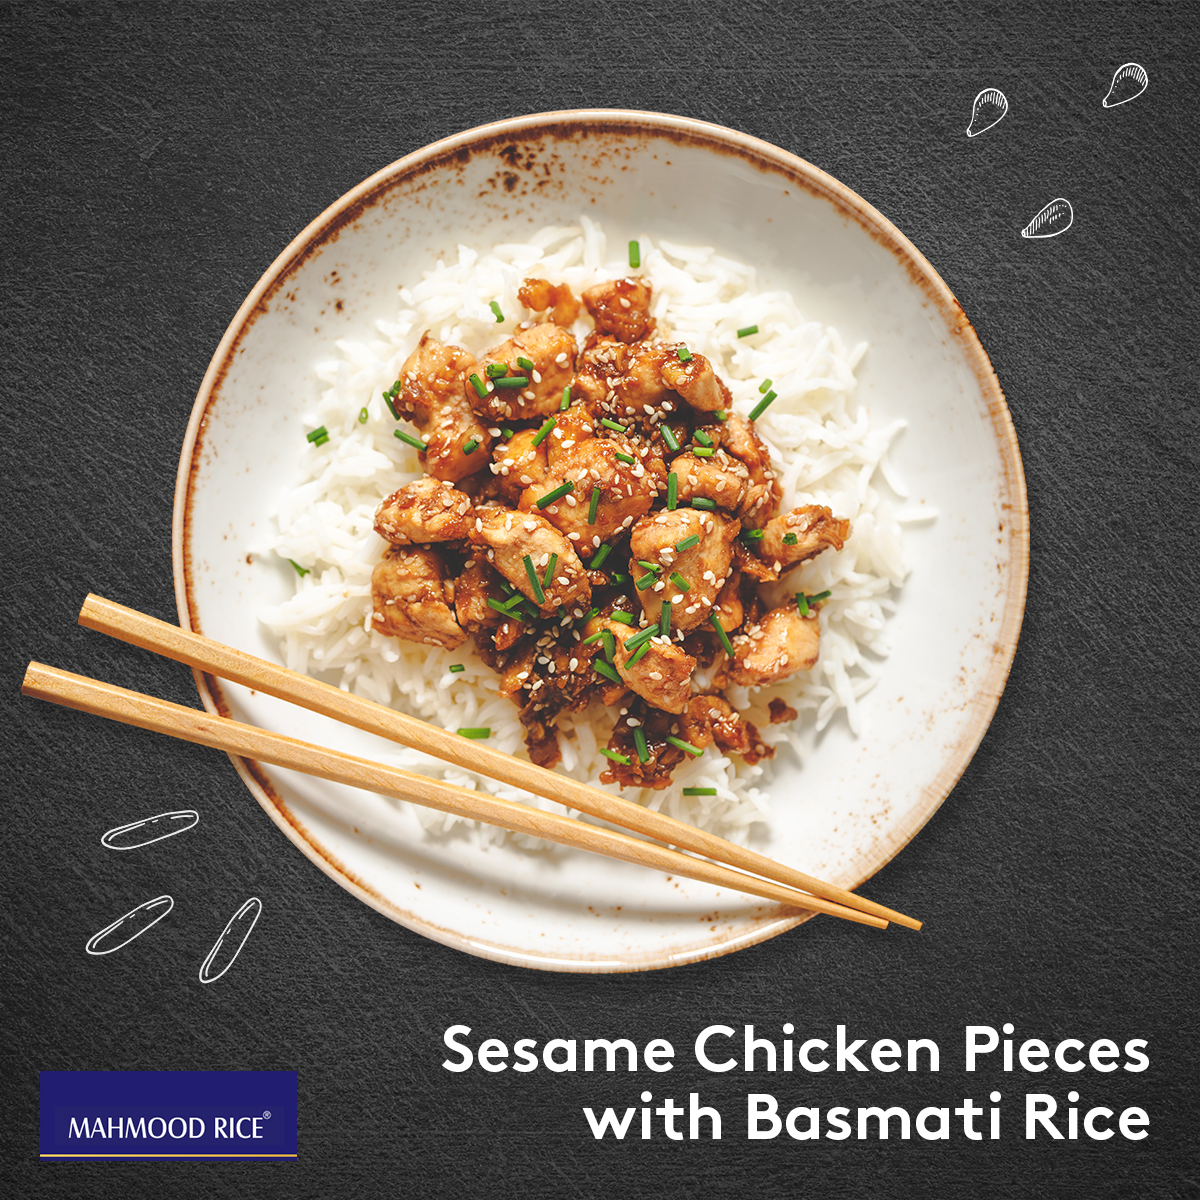 Sesame Chicken Pieces with Basmati Rice